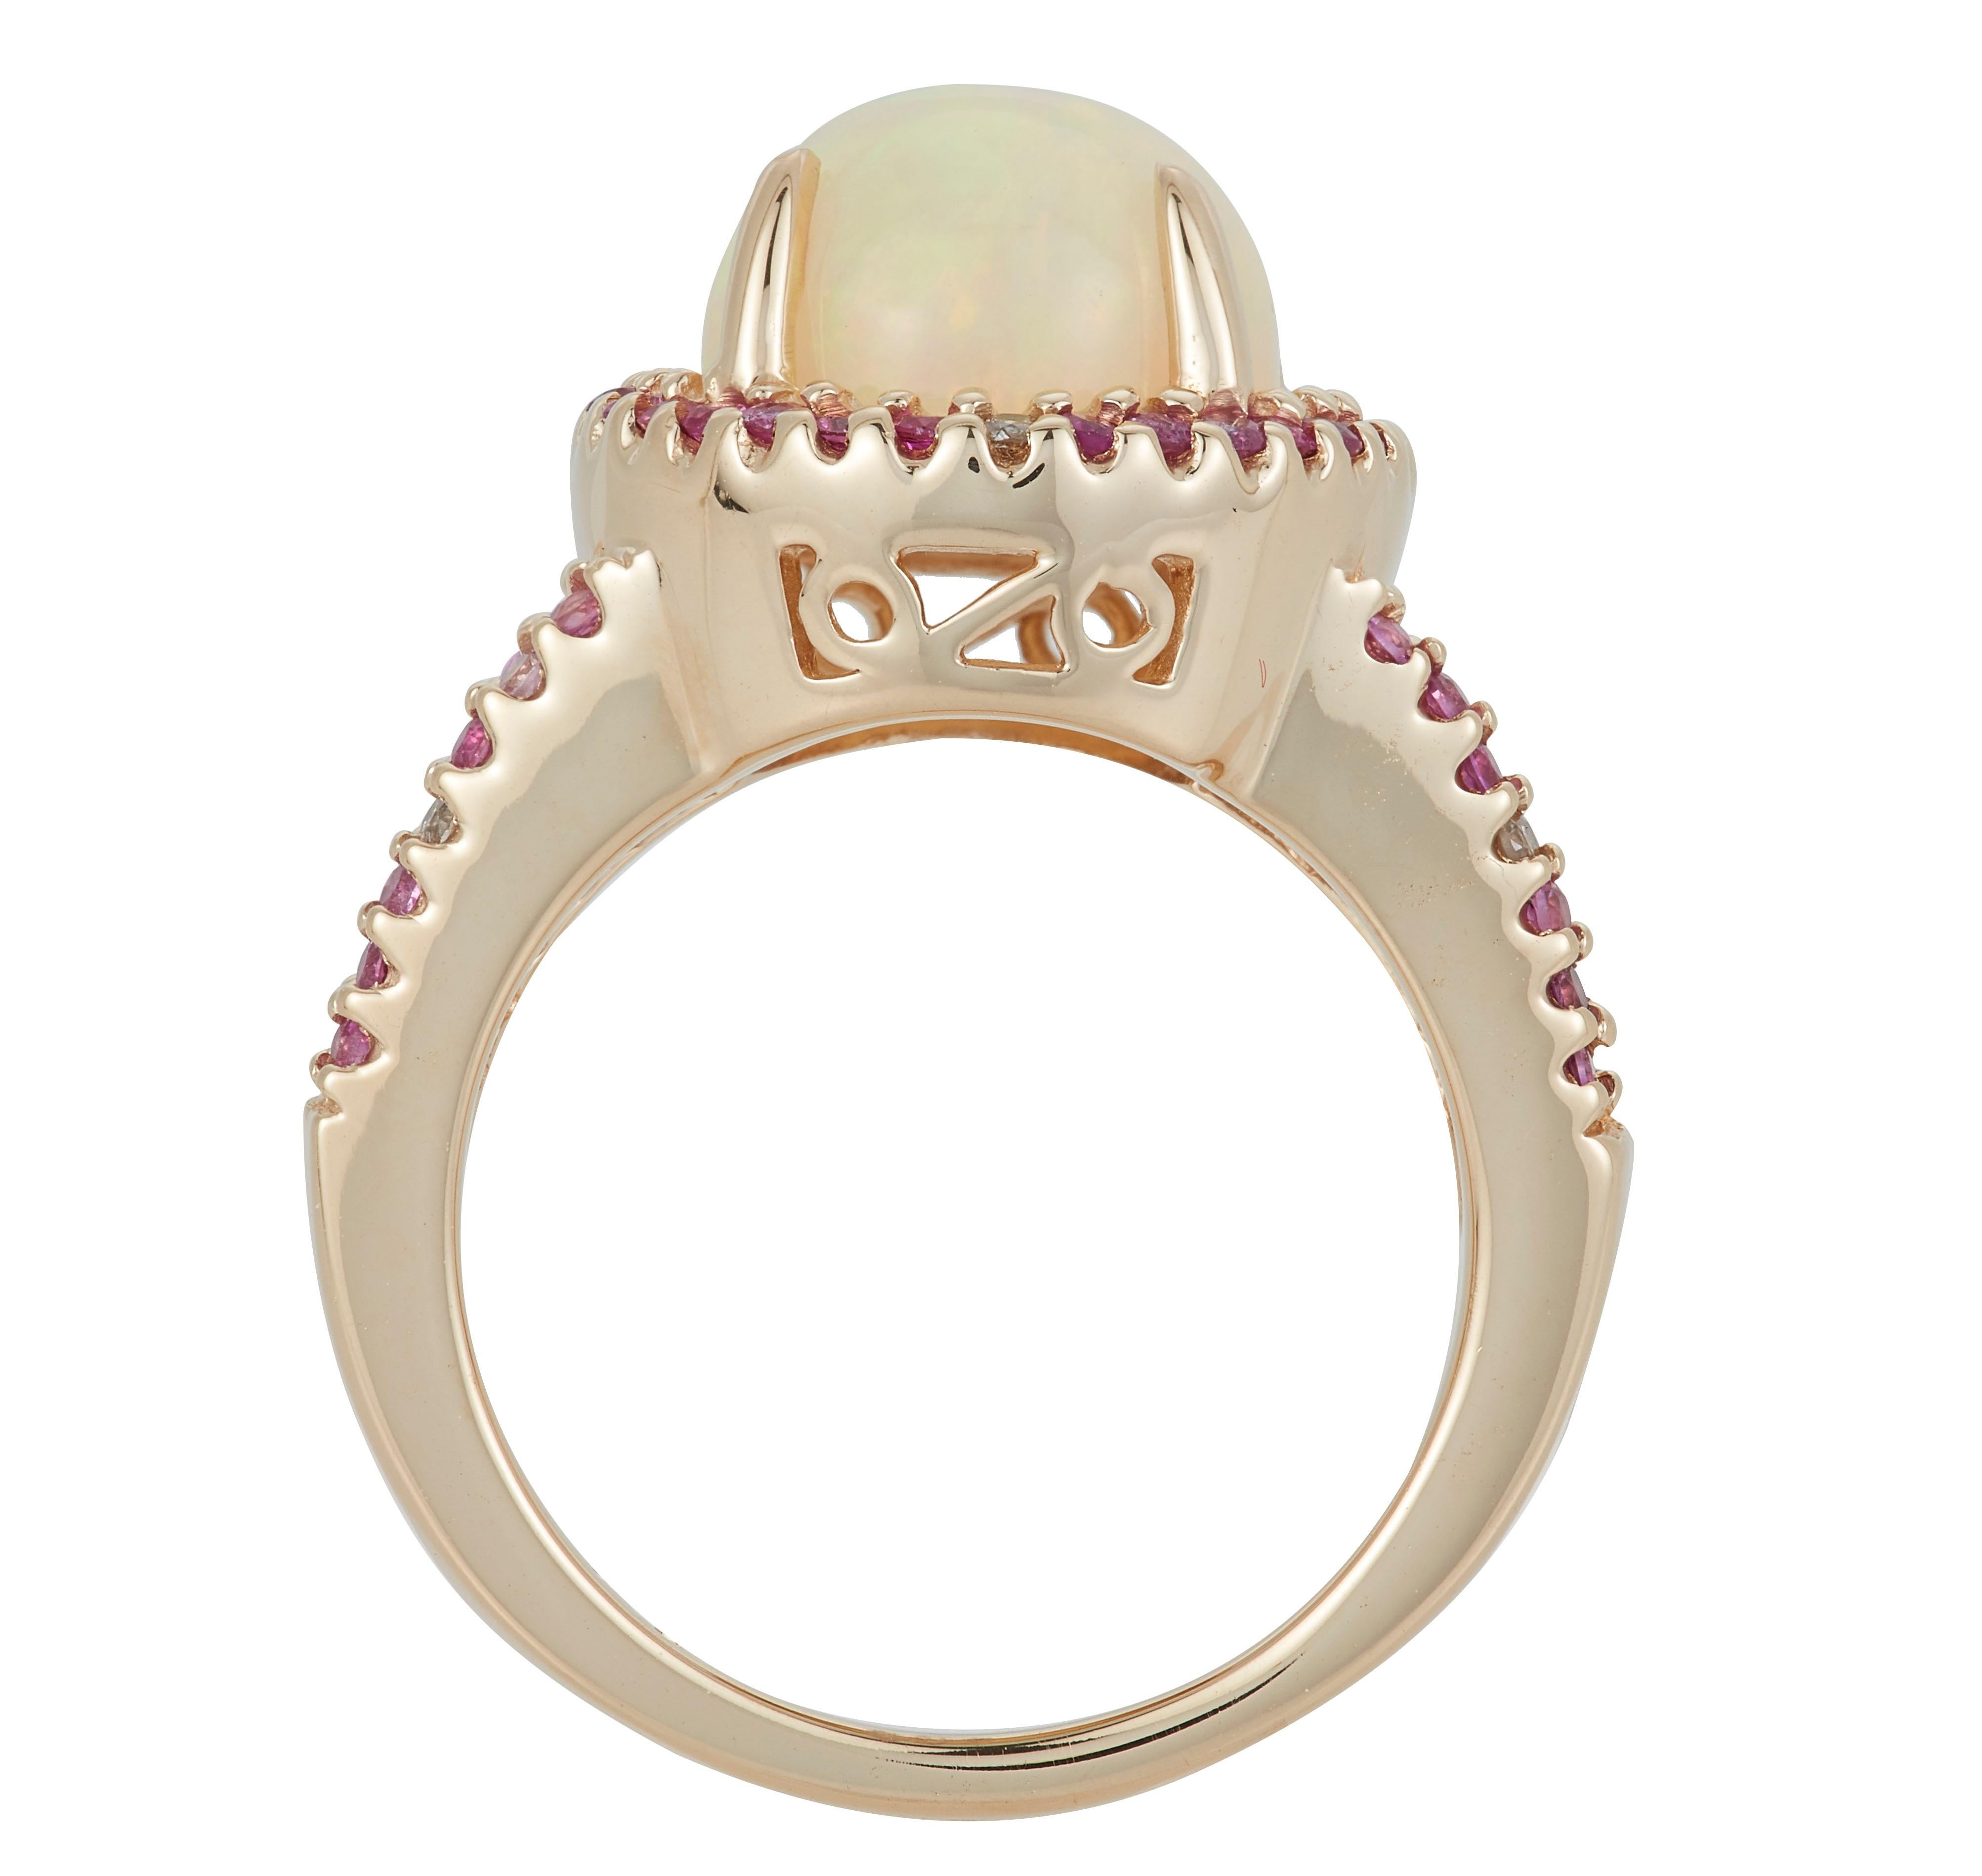 Metal: 14K Yellow Gold
Center Stone: 1 Round Opal 3.20 carats
Side Stones: 52 Round Pink Sapphires 0.64 carats total weight
Accent Stones: 8 Round Brilliant Diamond 0.10 carats total weight
Clarity: SI / Color: H-I

Fine one-of-a-kind craftsmanship